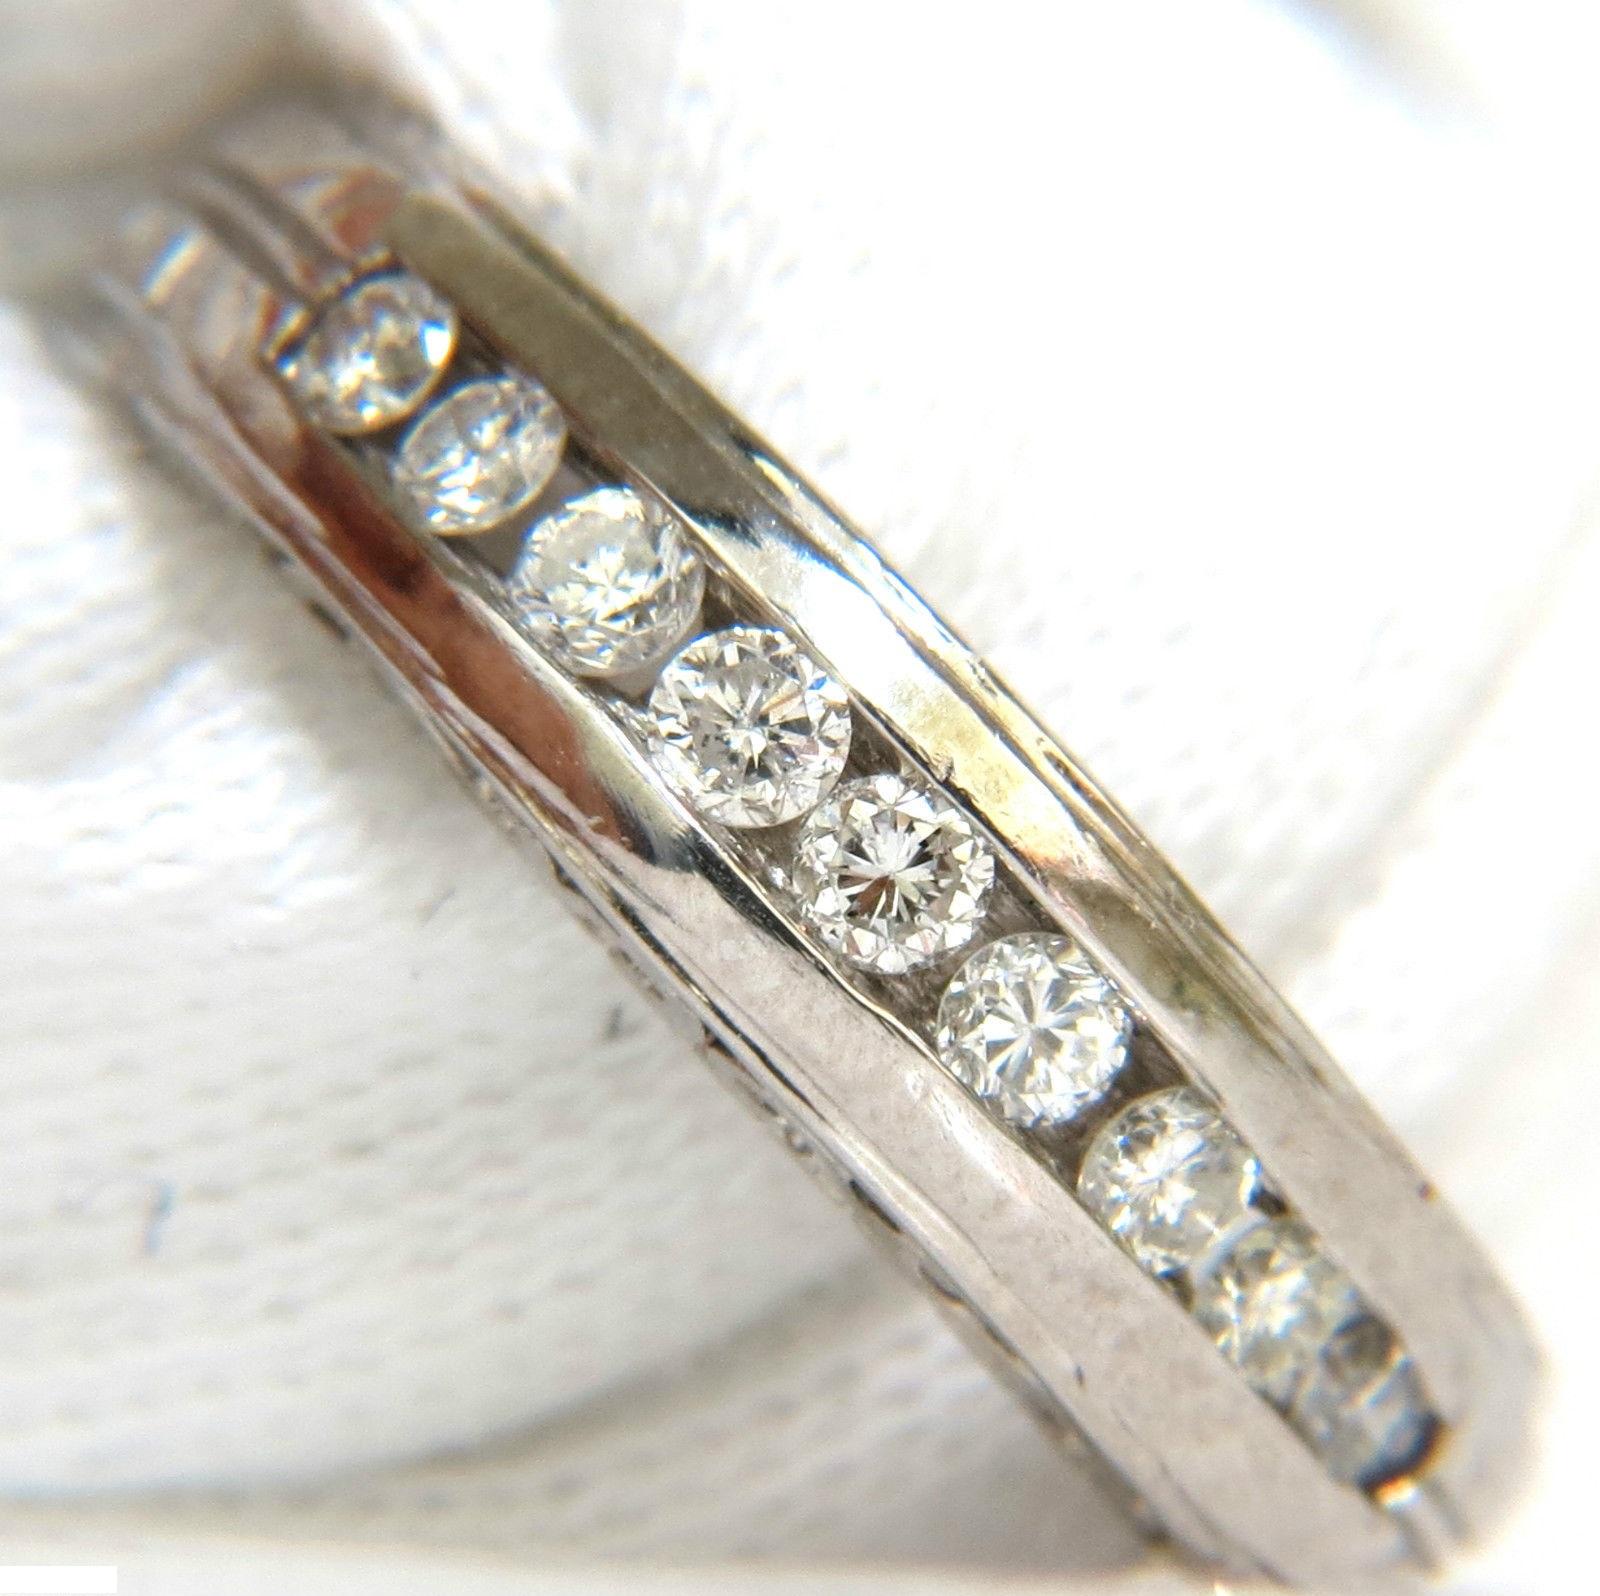 Vintage Platinum Deco

.75ct diamonds

G-color Vs-2 clarity

Full Cuts and rounds

Gorgeous etching detail on sites and shanks

9.8 grams

Ring is 5.6mm wide

$4500 Appraisal will accompany